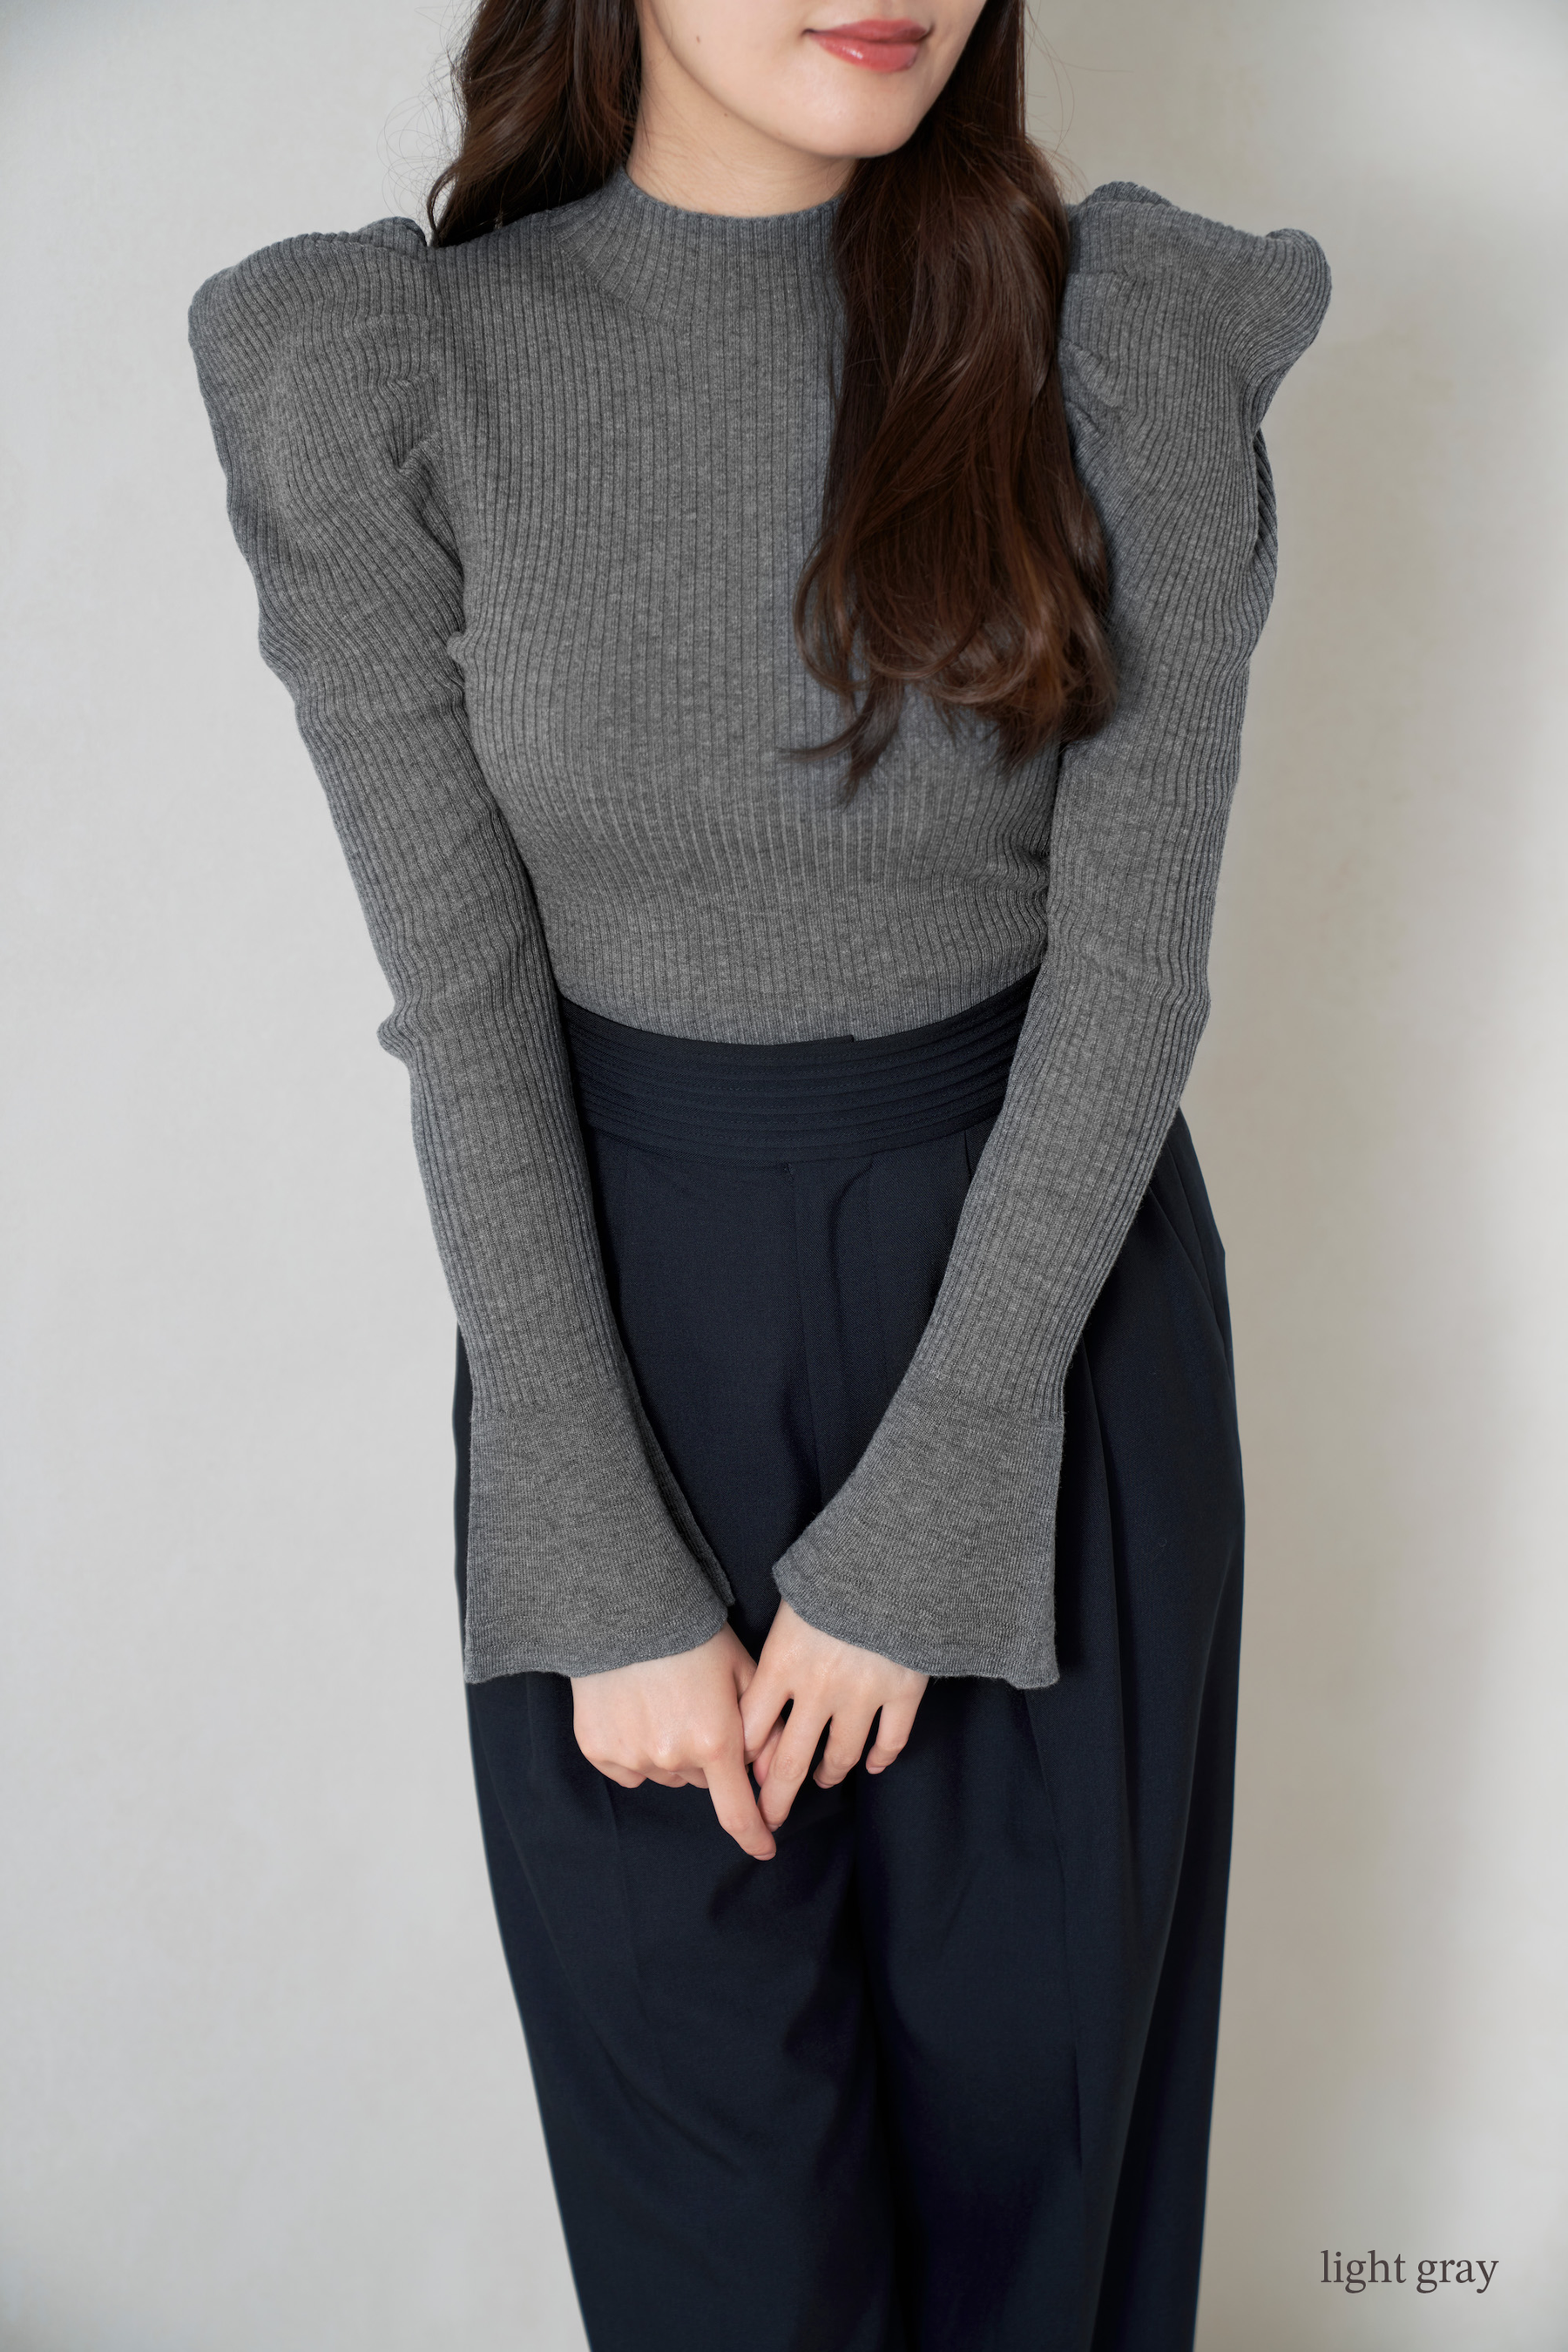 Her lip to Volume sleeve Rib Knit Top